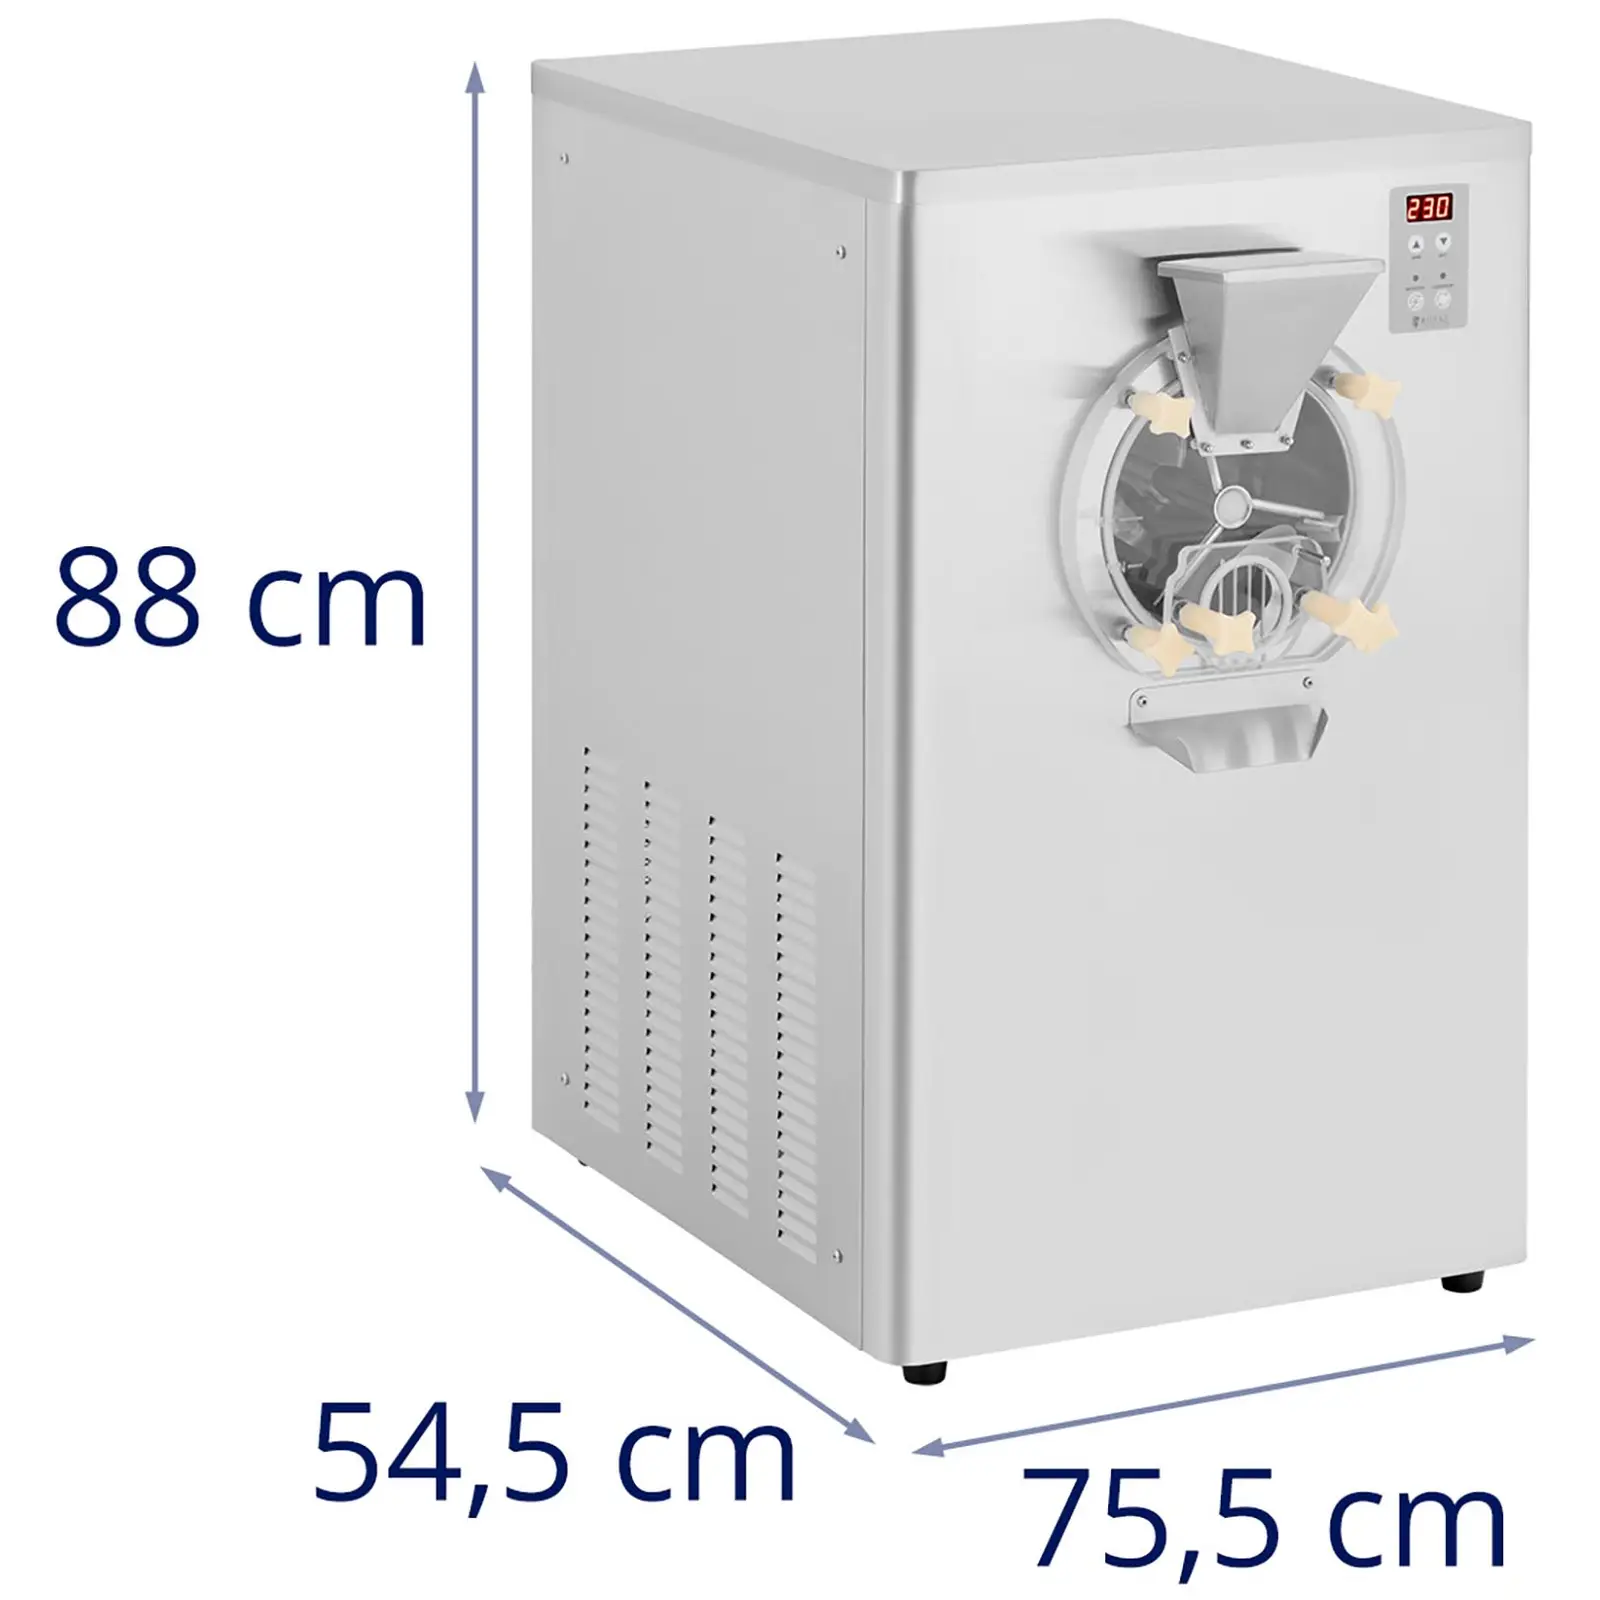 Factory second Ice Cream Maker - 1500 W - 15 - 22,5 l/h - 1 flavour - Royal Catering